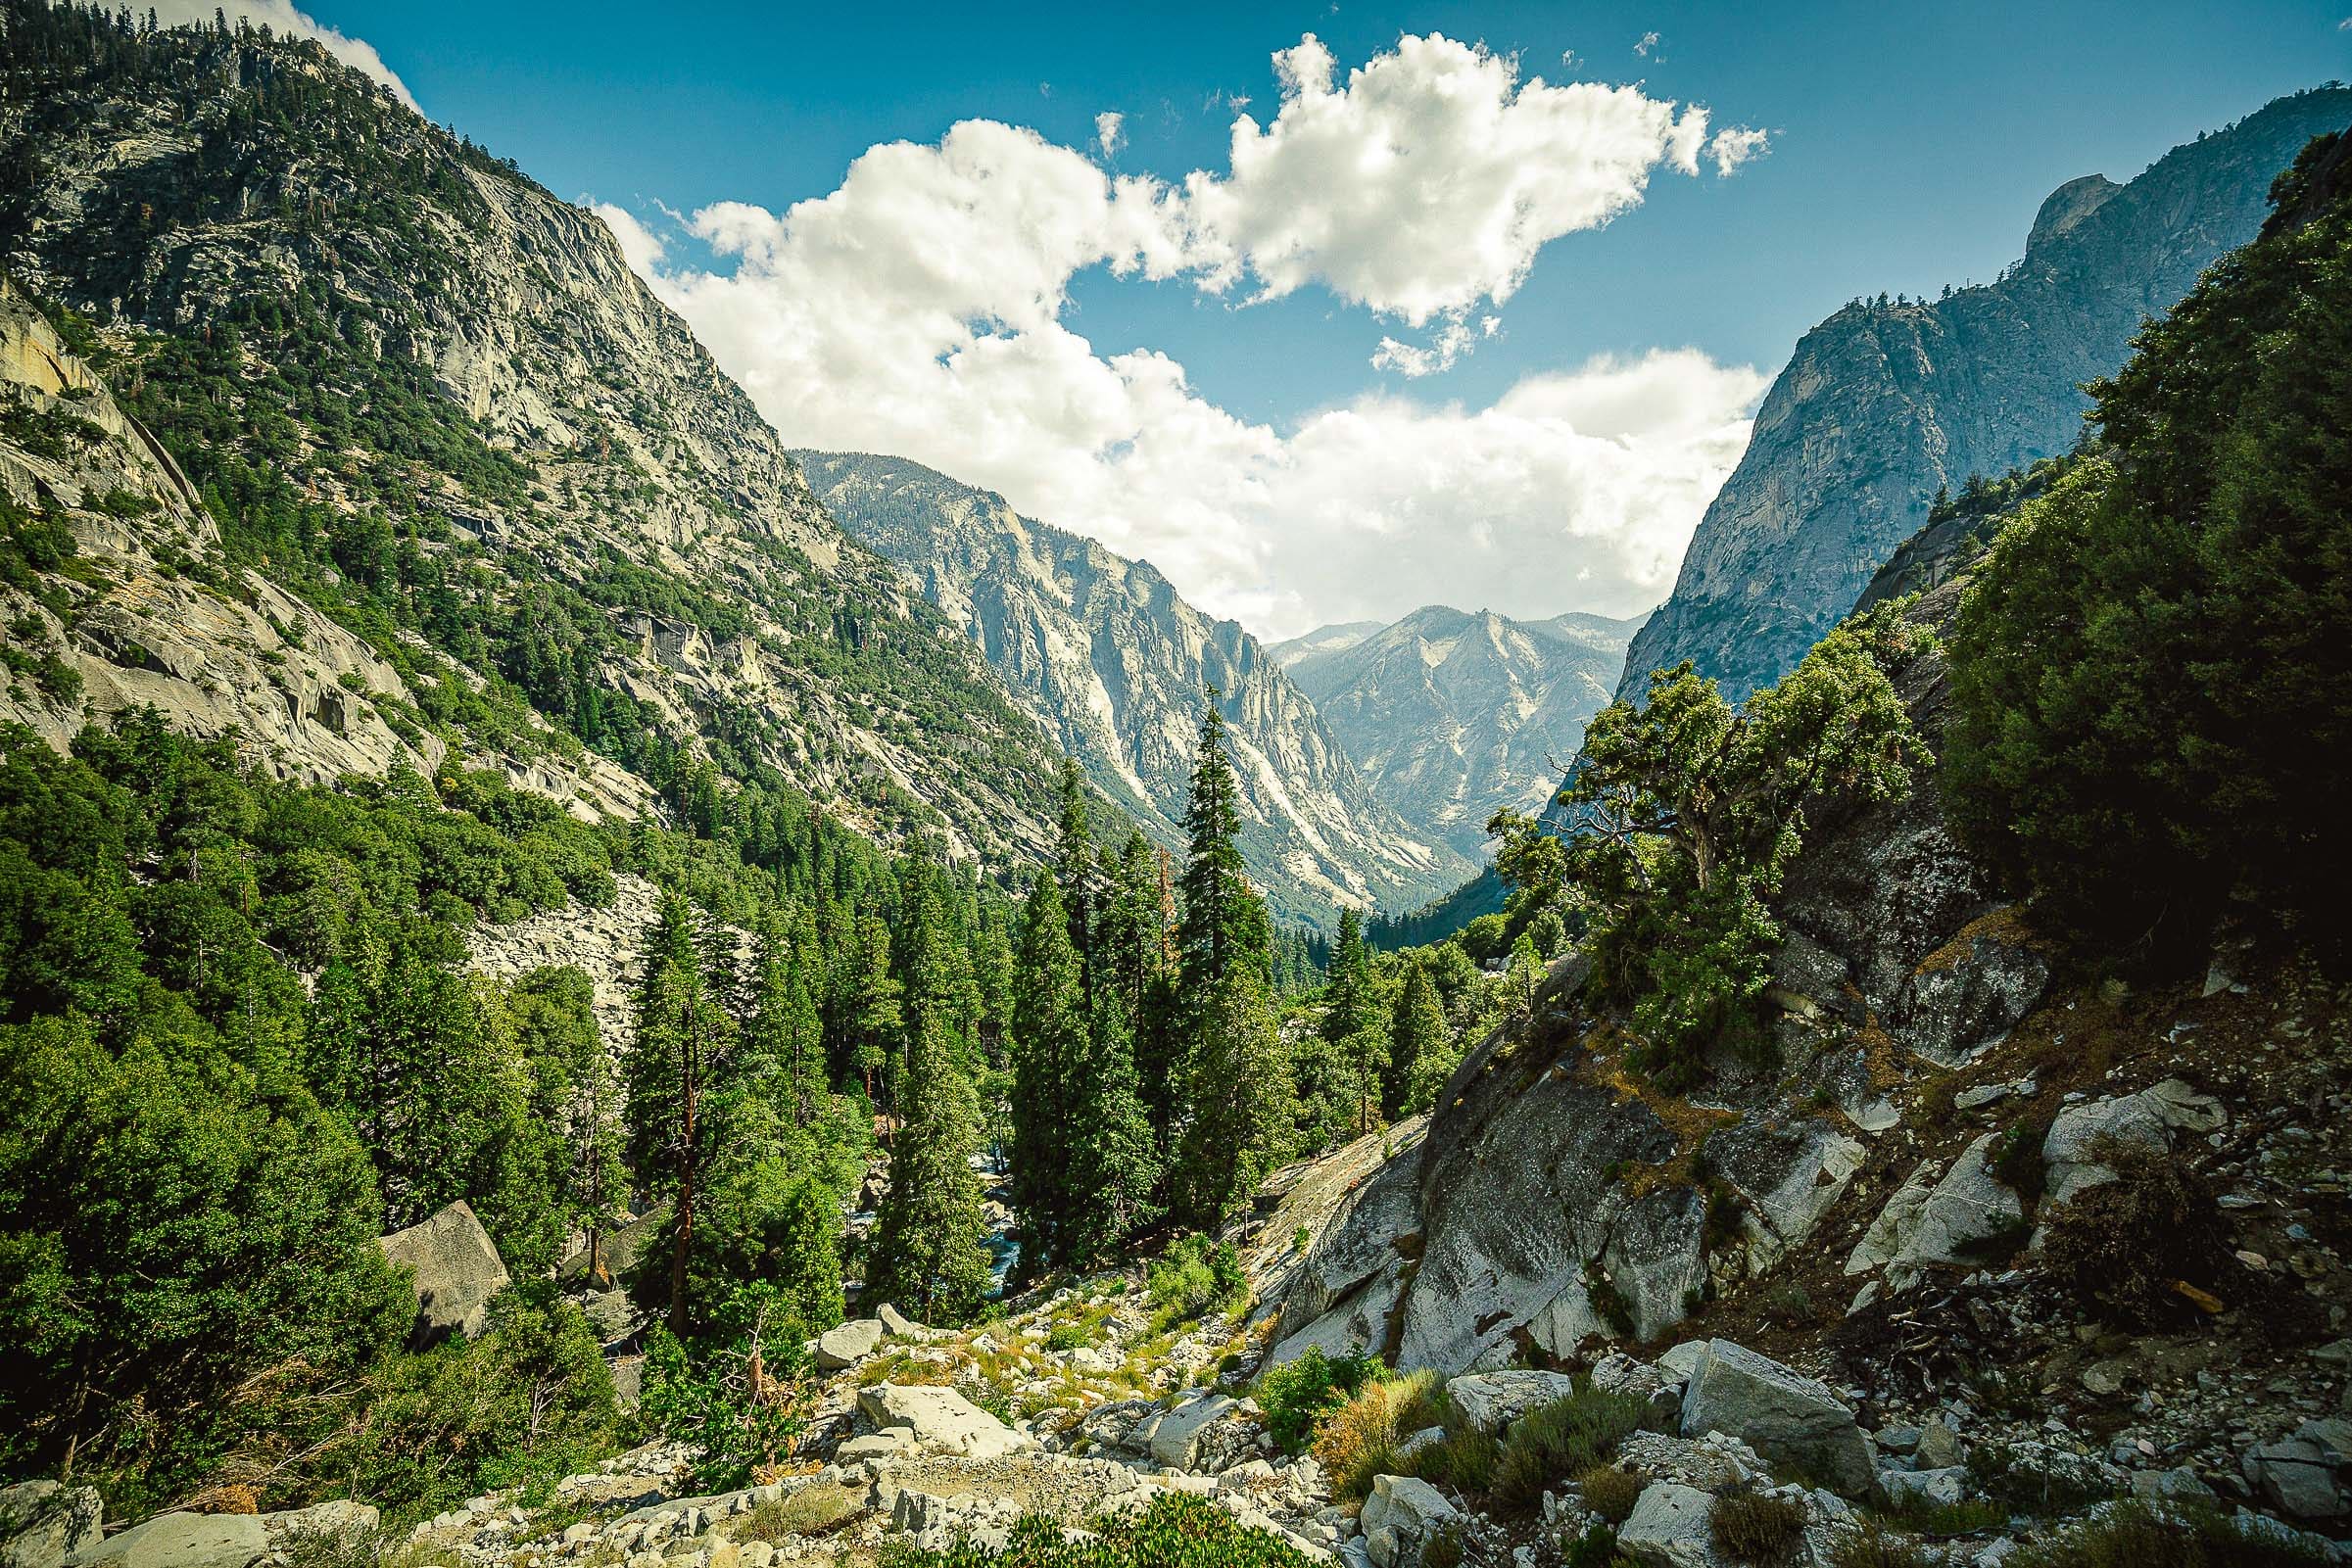 Adventurer’s Guide to Kings Canyon National Park, California